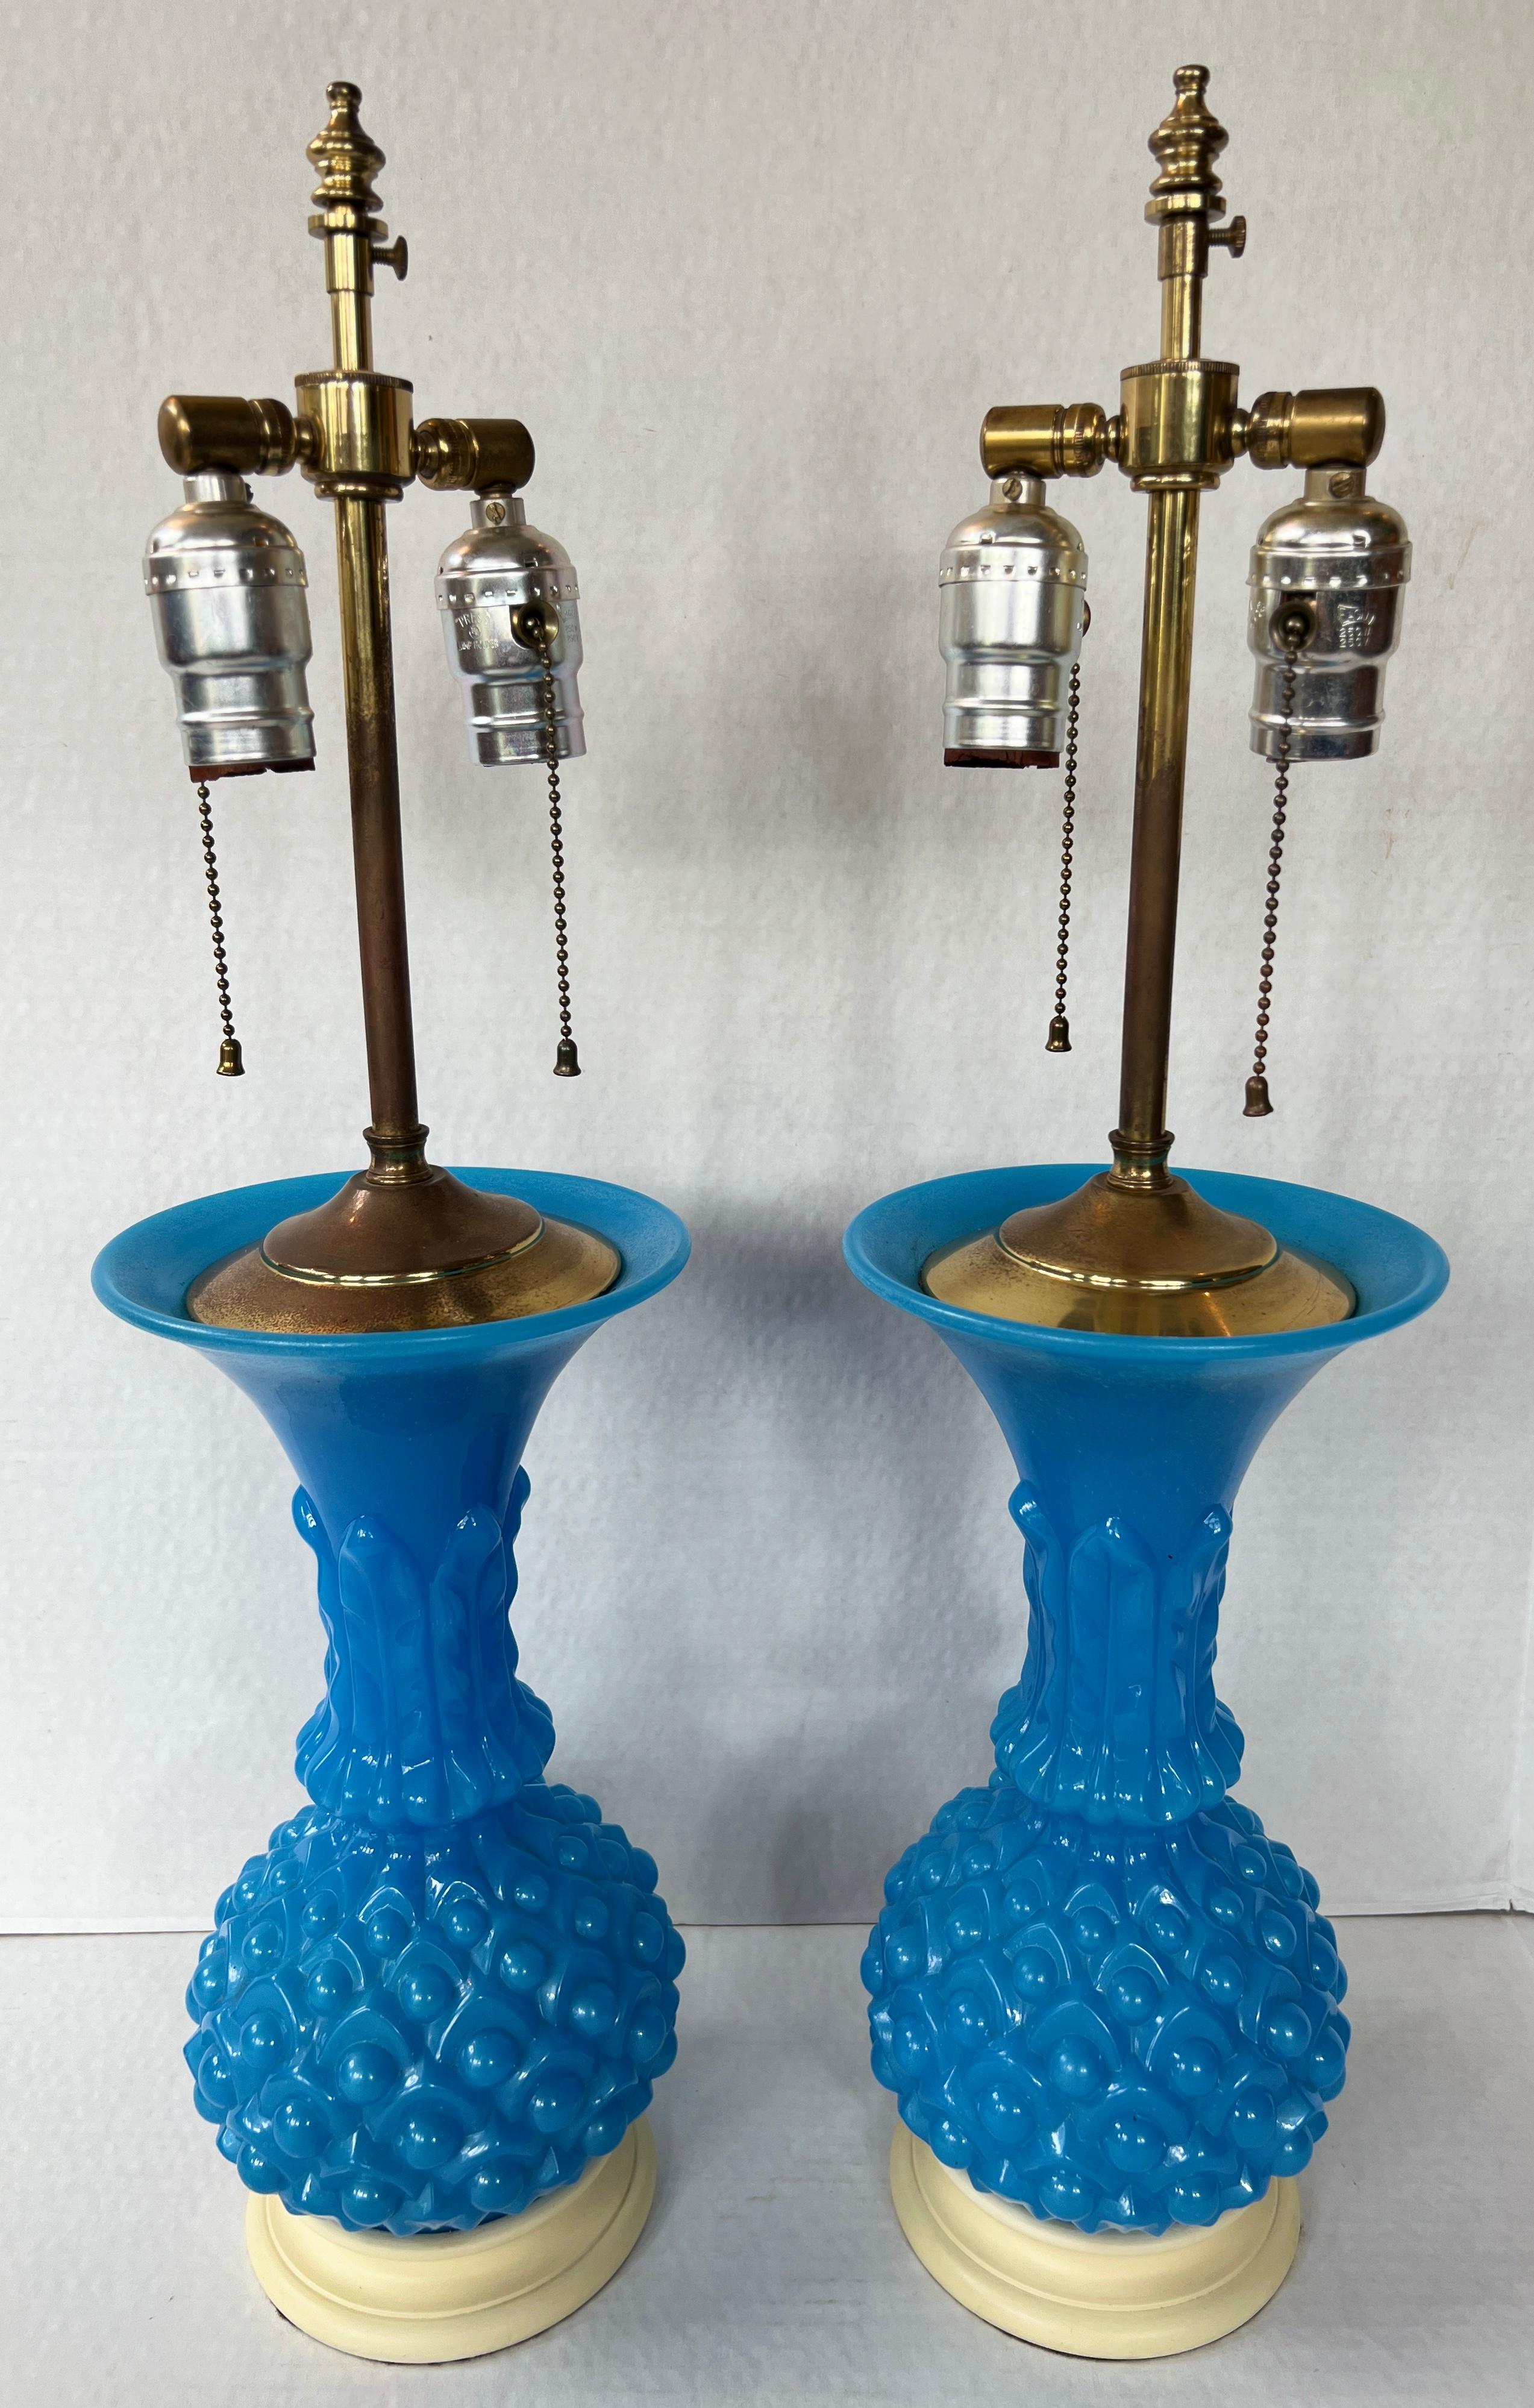 Exquisite 19th-century French vintage opaline glass vases repurposed into stunning lamps, combining timeless elegance with intricate craftsmanship.

Markings in the switch: LEVITON 6A.125V. 3A.250. 3A.125VT FOR 18 SPT-I ONLY